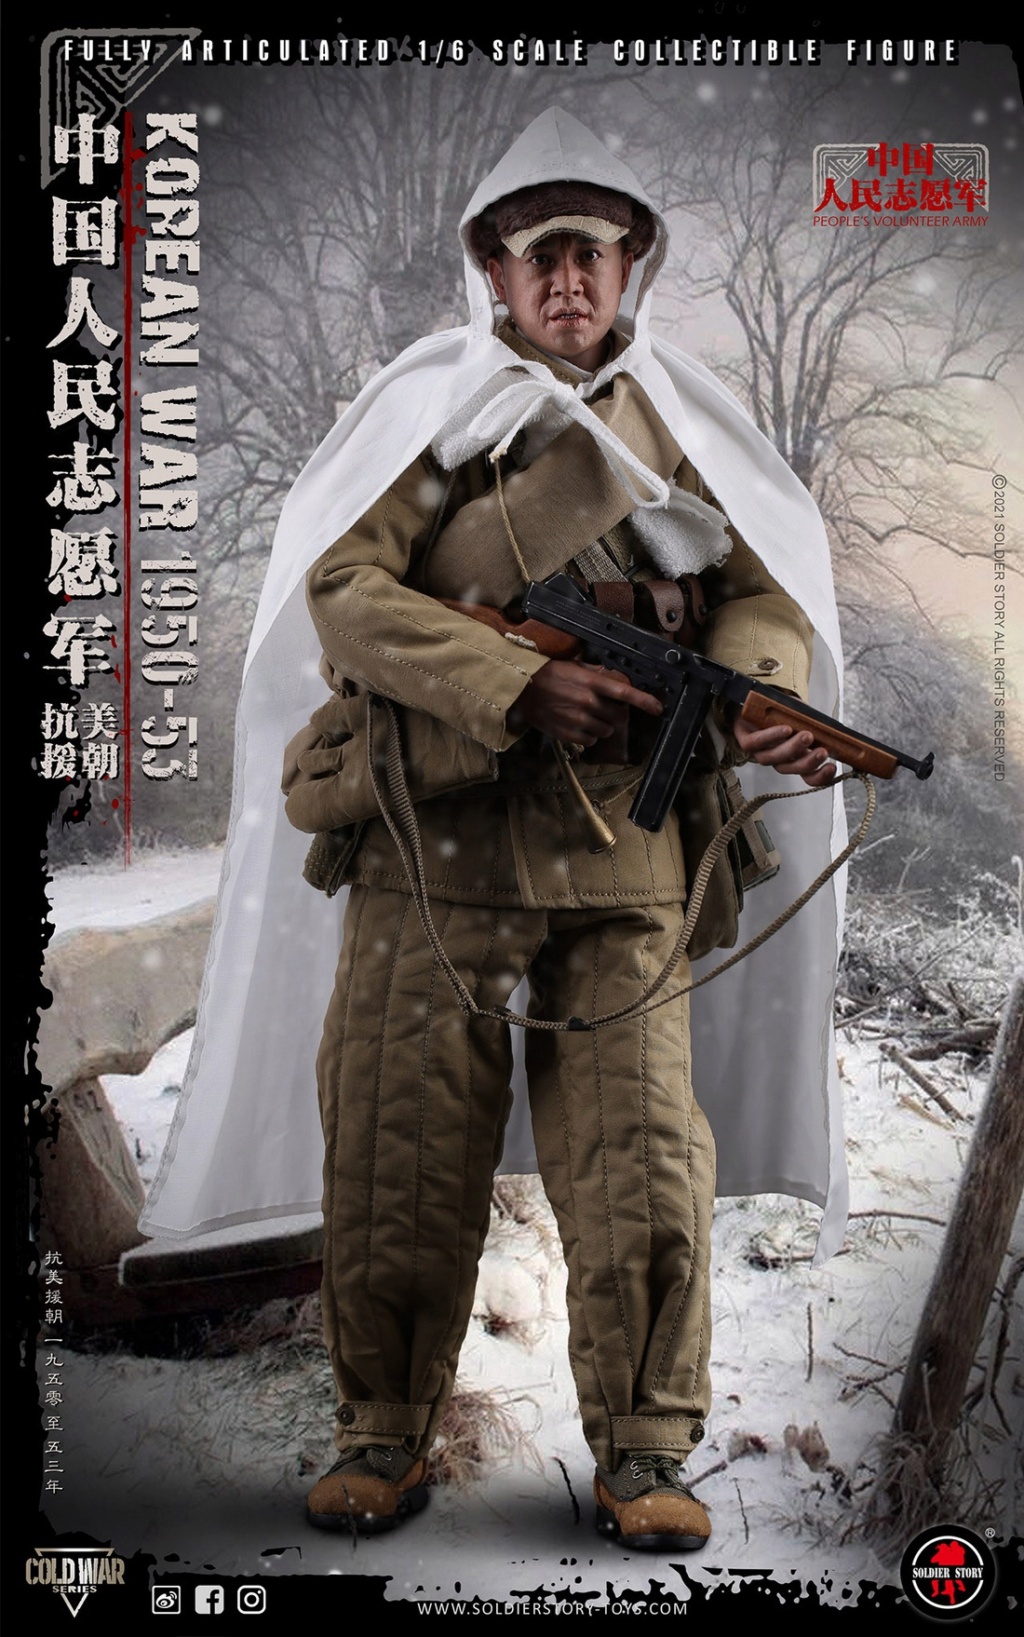 NEW PRODUCT: SOLDIER STORY: 1/6 Chinese People’s Volunteers 1950-53 Collectible Action Figure (#SS-124) 72606a10